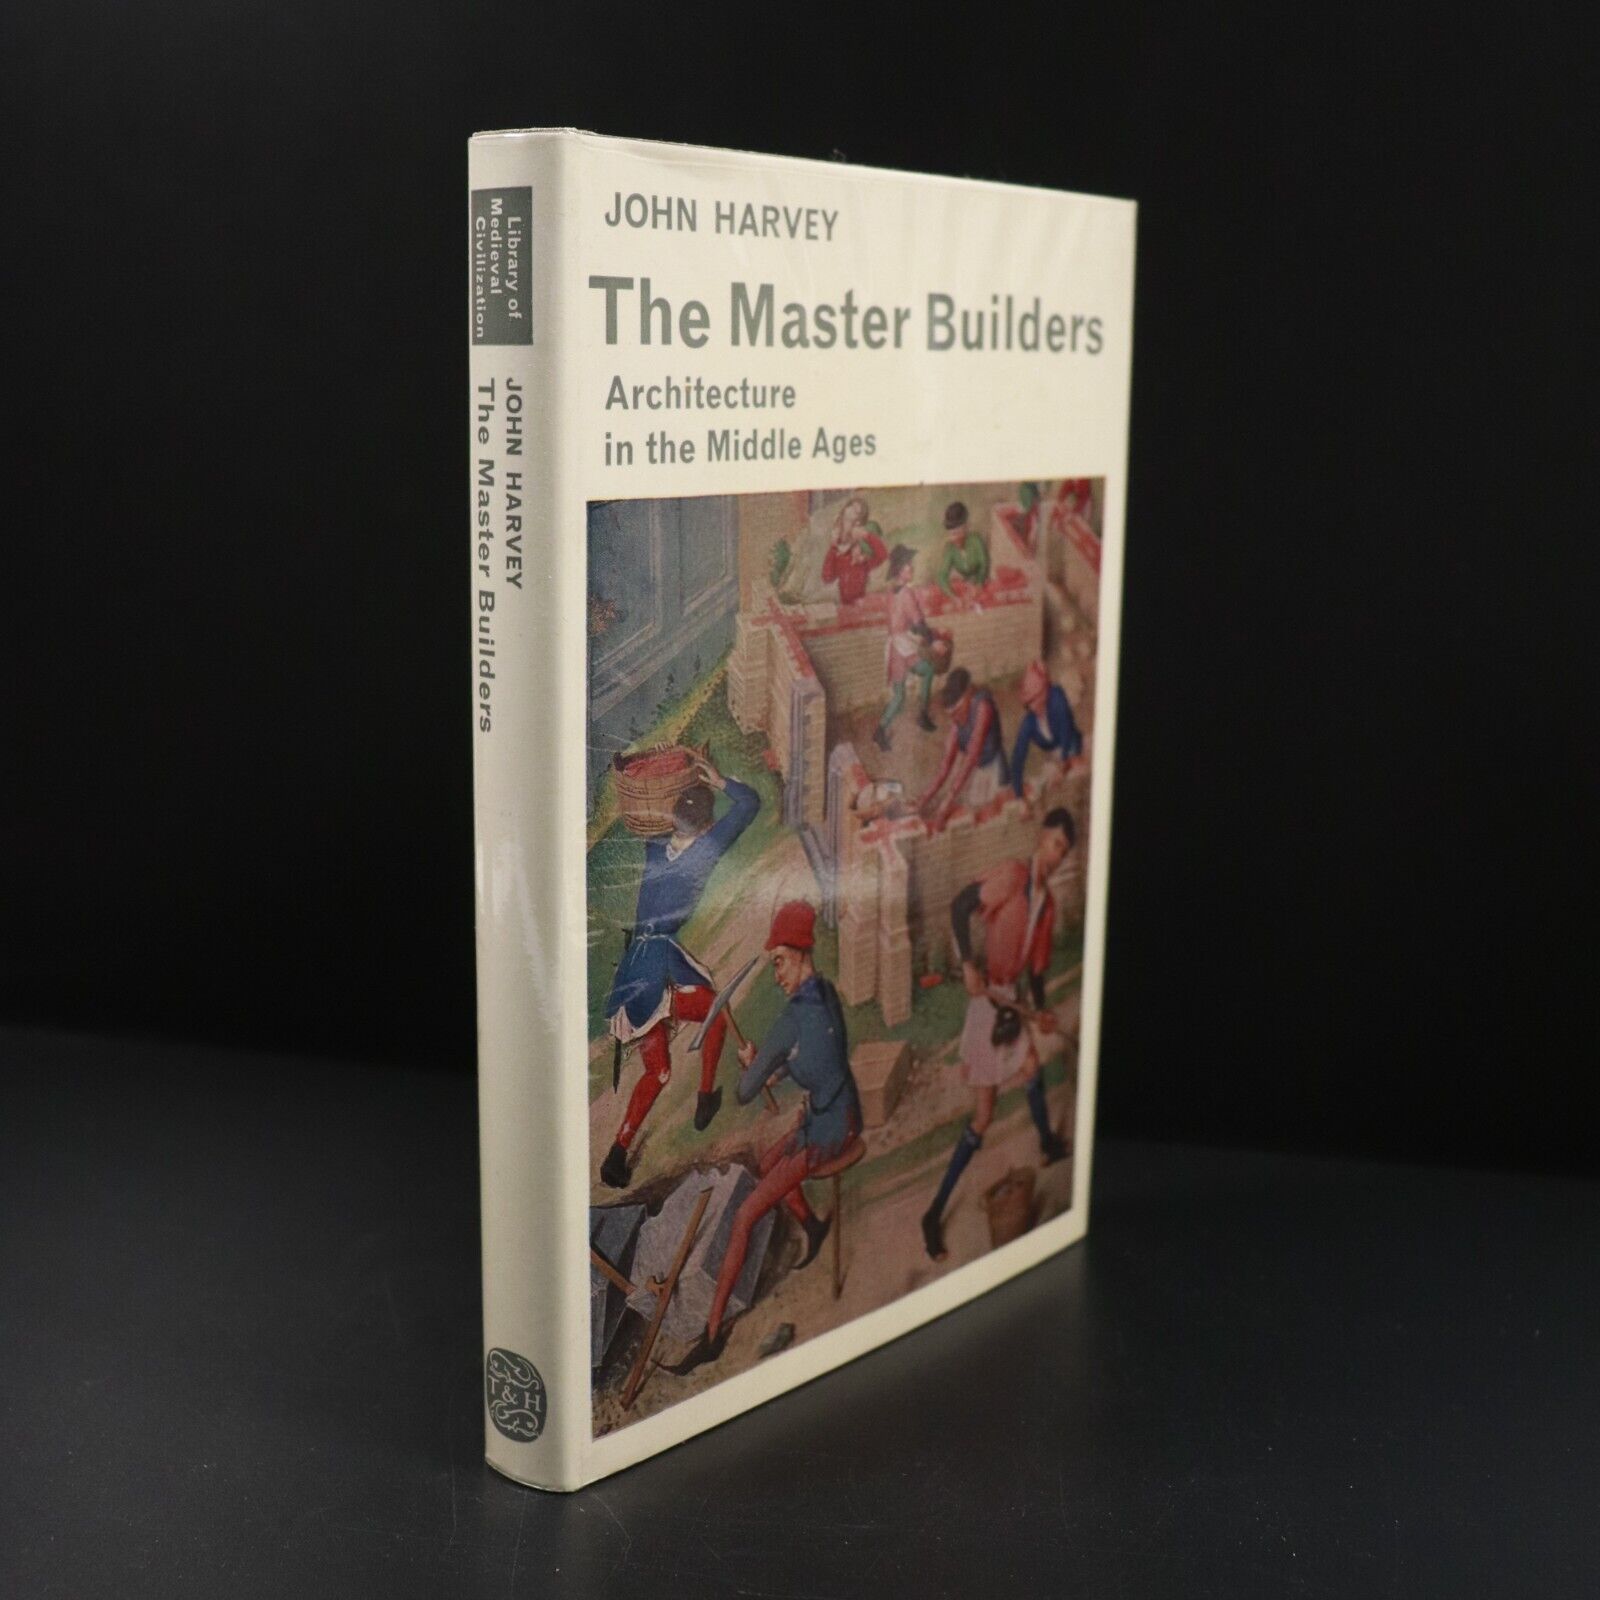 1971 The Master Builders Architecture In The Middle Ages by John Harvey Book